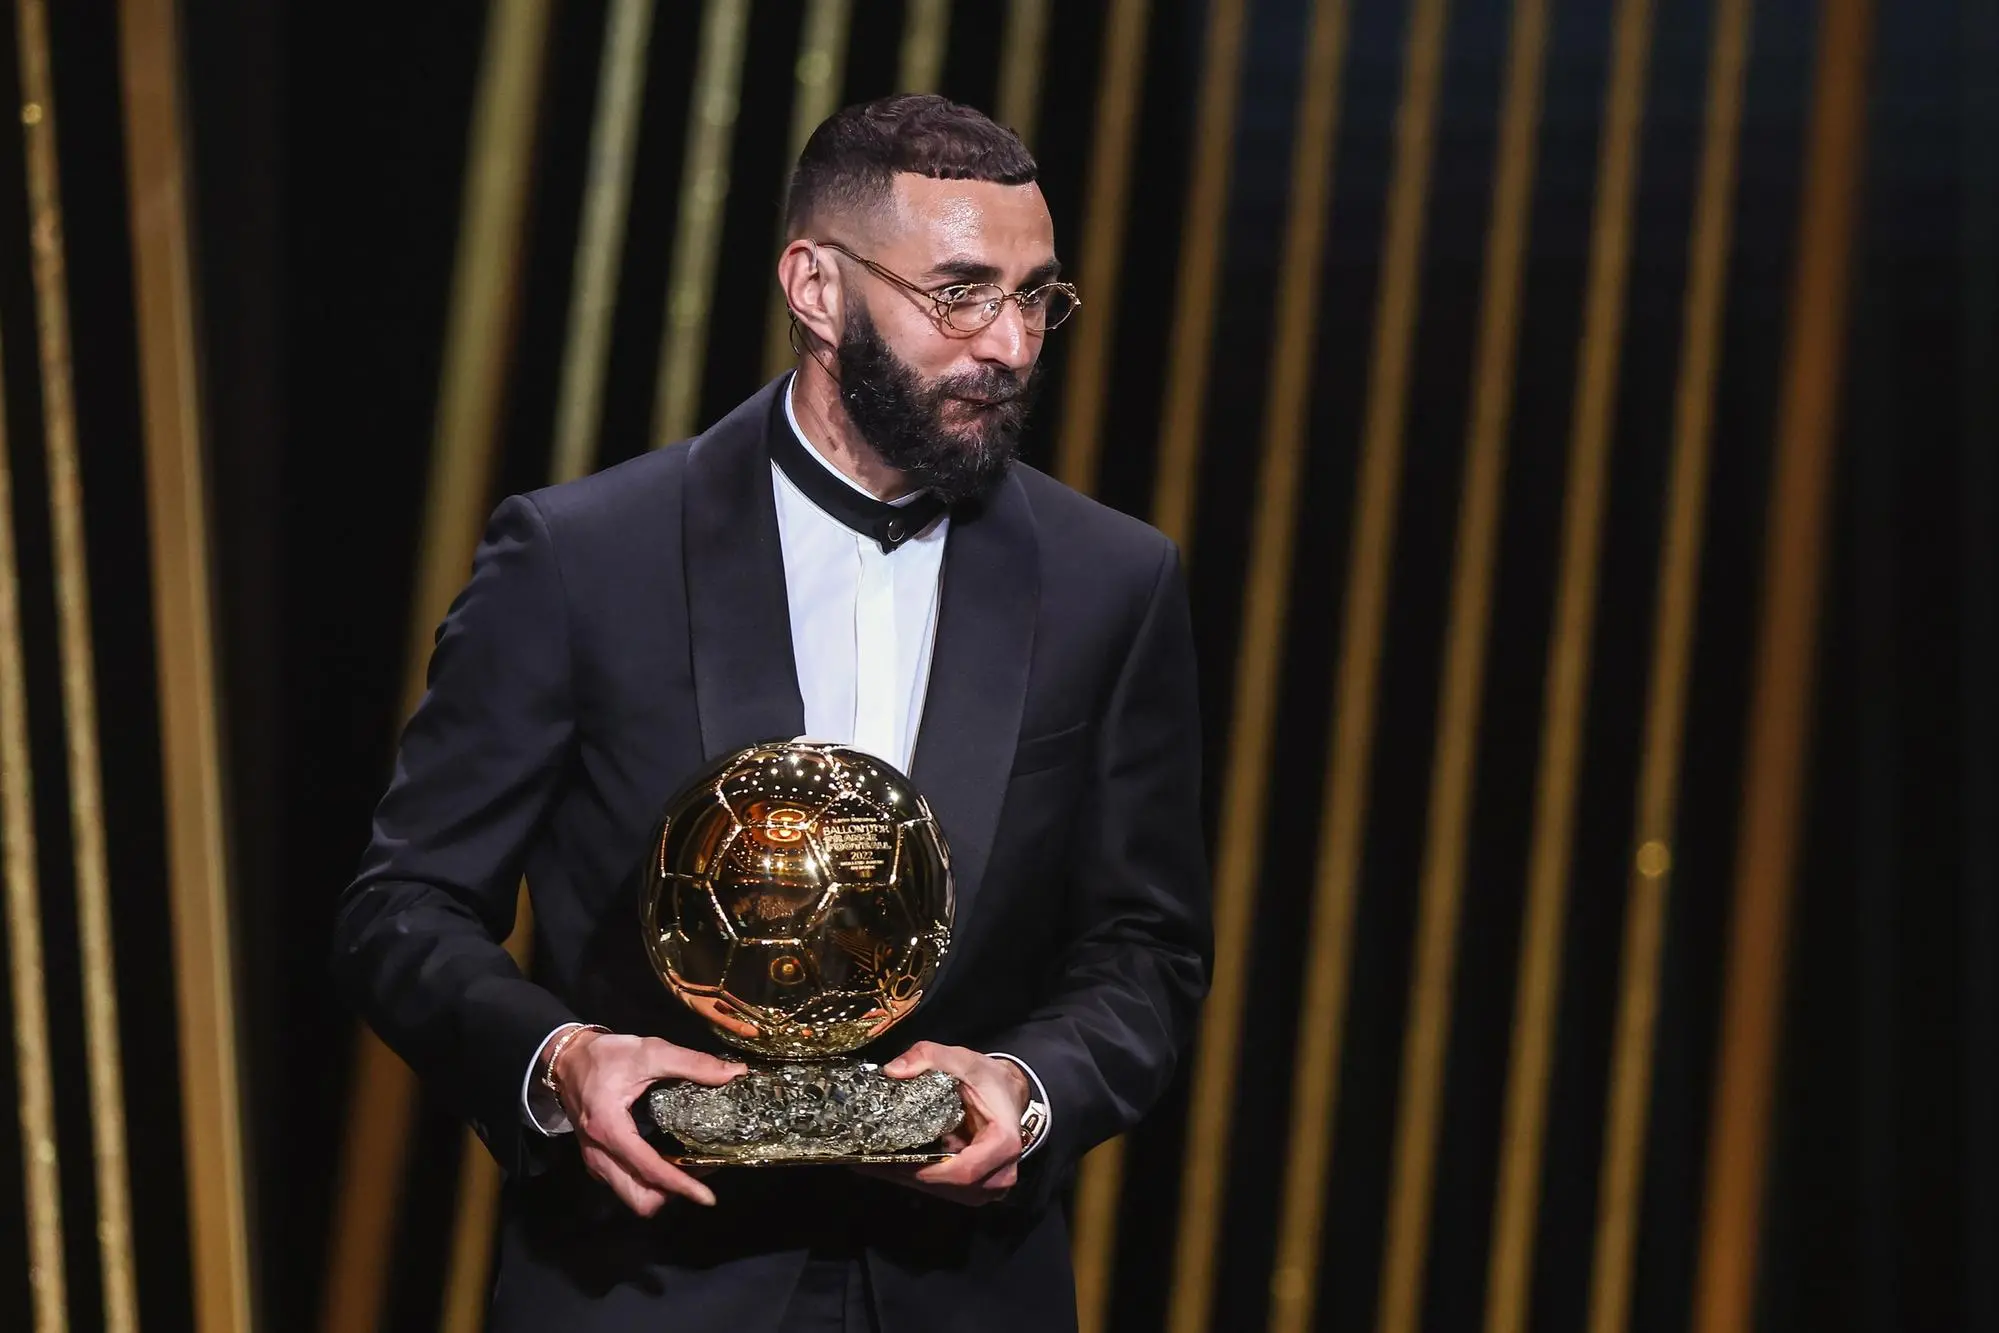 epa10249554 Karim Benzema of Real Madrid receives the Men’s Ballon d'Or Trophy during the Ballon d'Or ceremony in Paris, France, 17 October 2022. For the first time the Ballon d'Or, presented by the magazine France Football, will be awarded to the best players of the 2021-22 season instead of the calendar year. EPA/Mohammed Badra